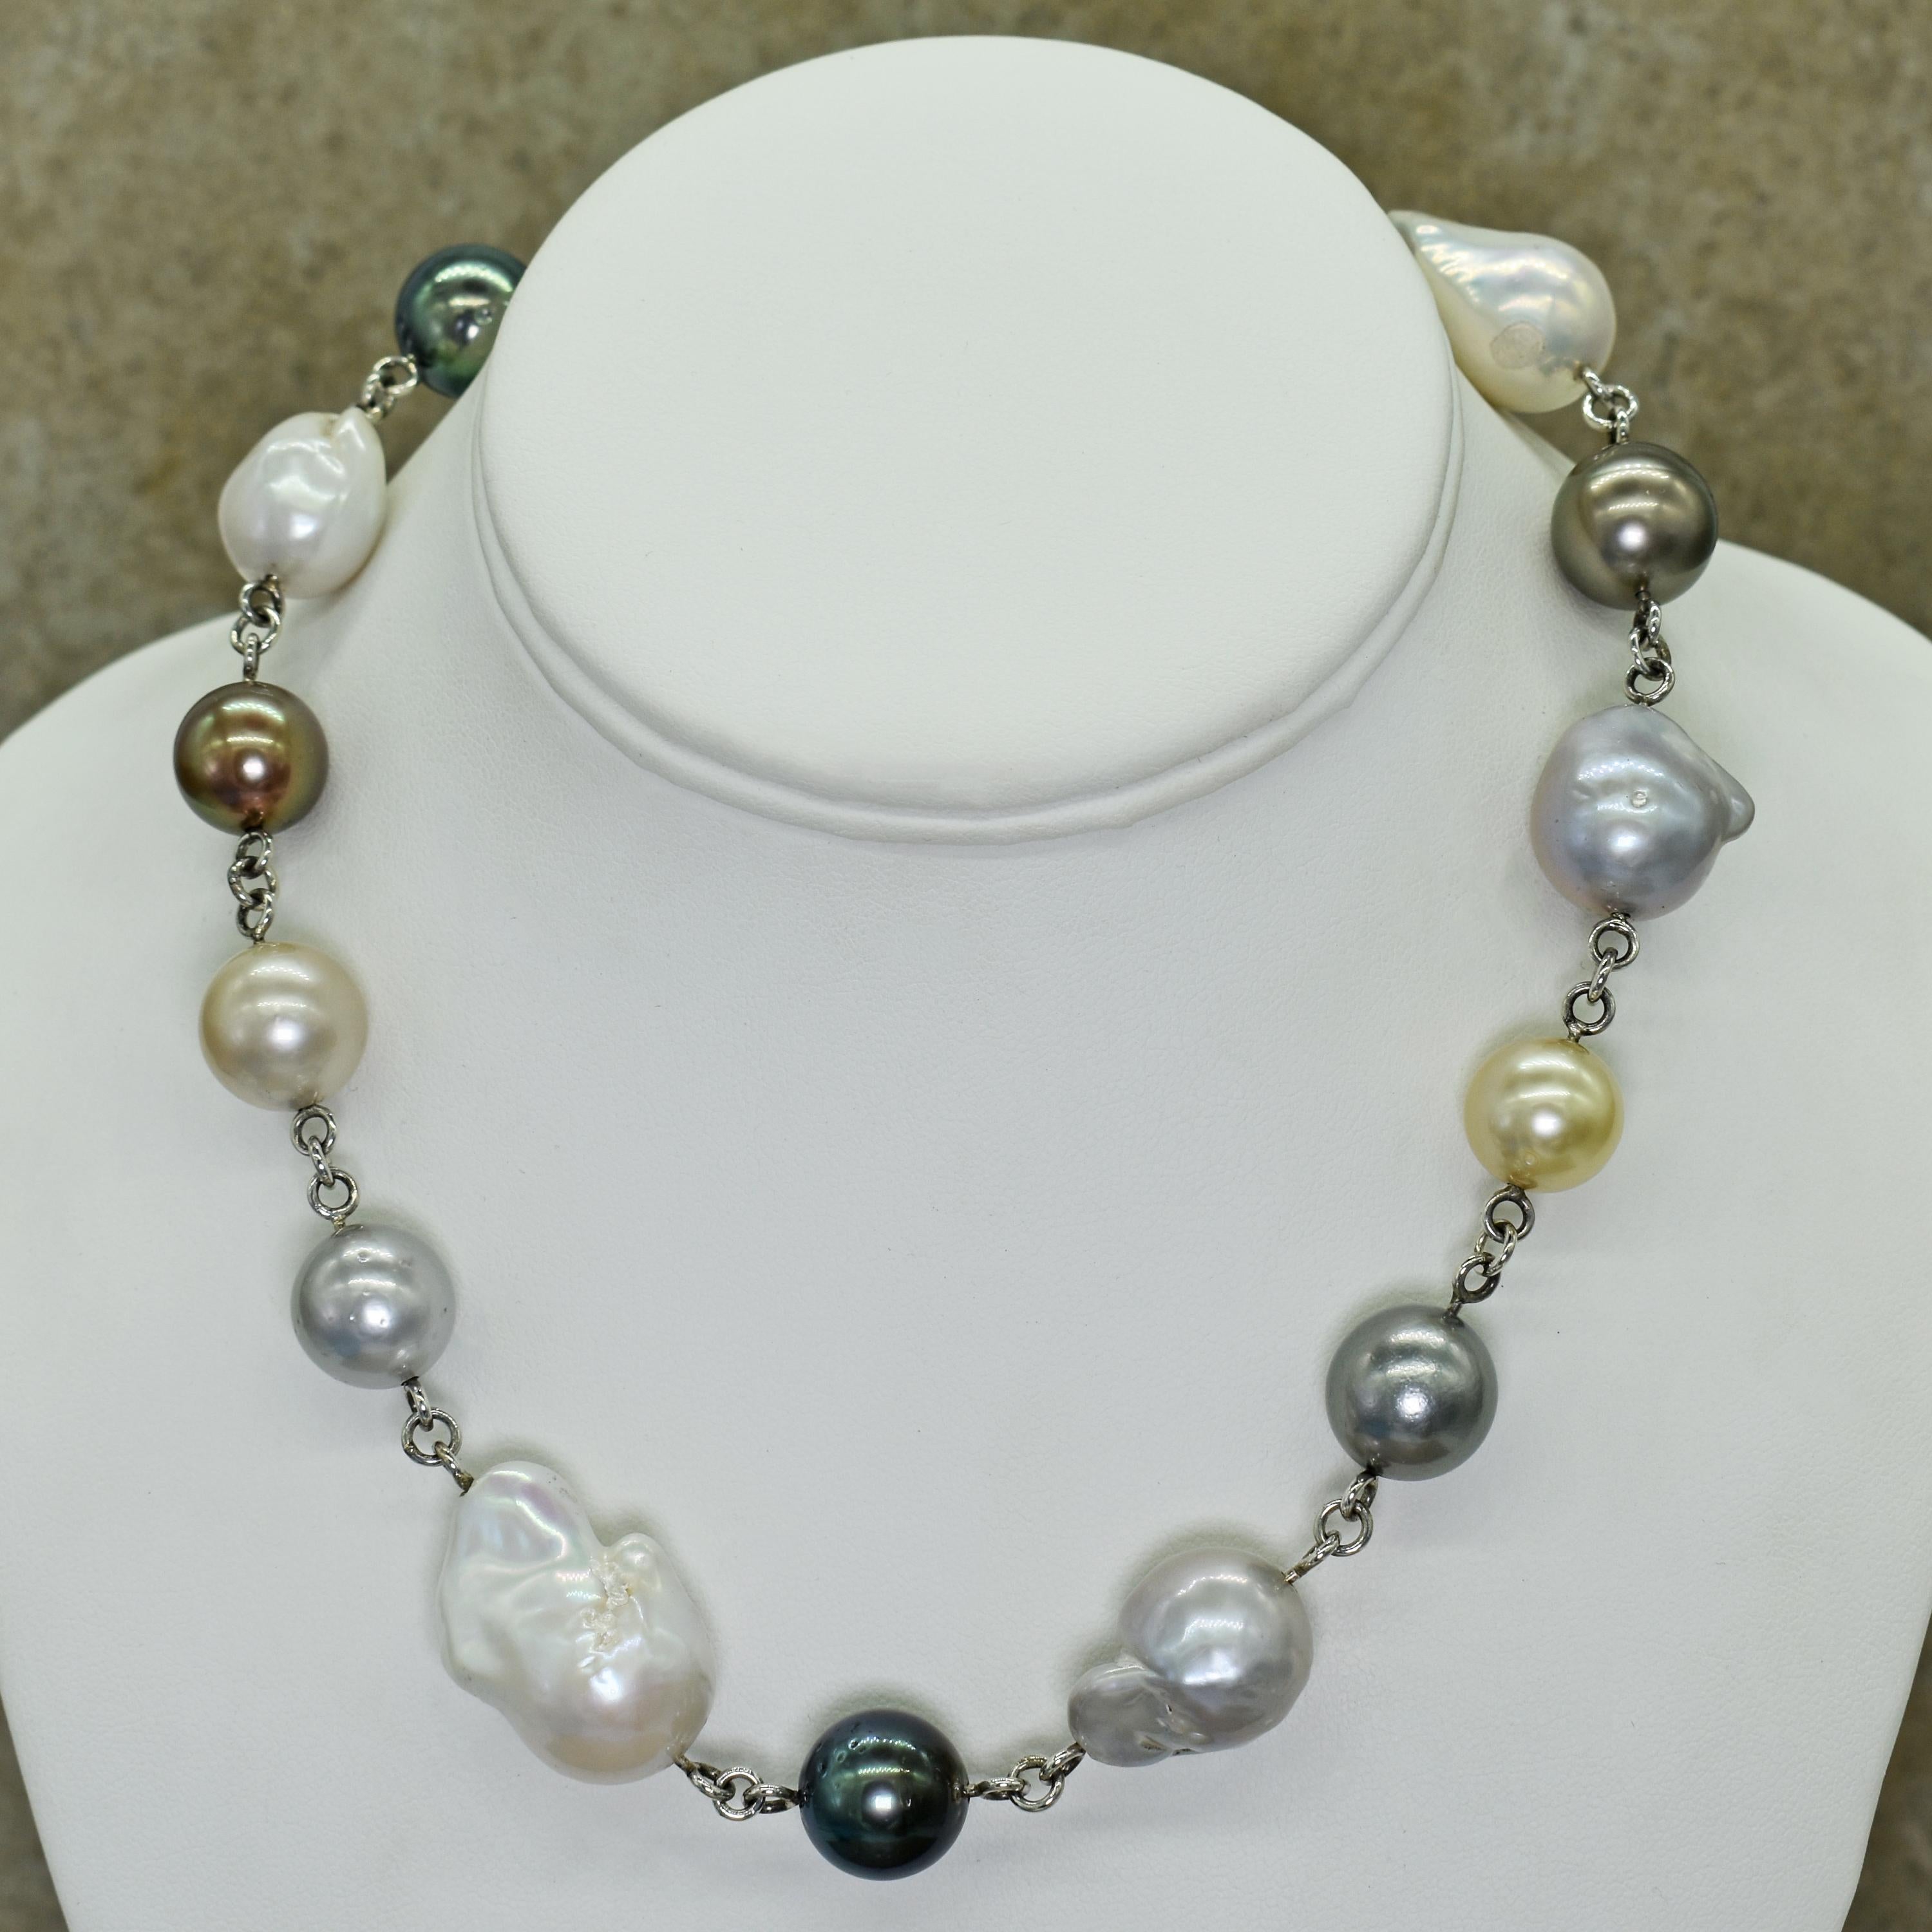 Round and baroque pearl drilled beads in a variety of colors, including Tahitian, White, Pink, Gold, Black and Gray, connected in a sterling silver link necklace. Pearls range from 13mm to 30mm in size. Necklace is 17 inches in length. This